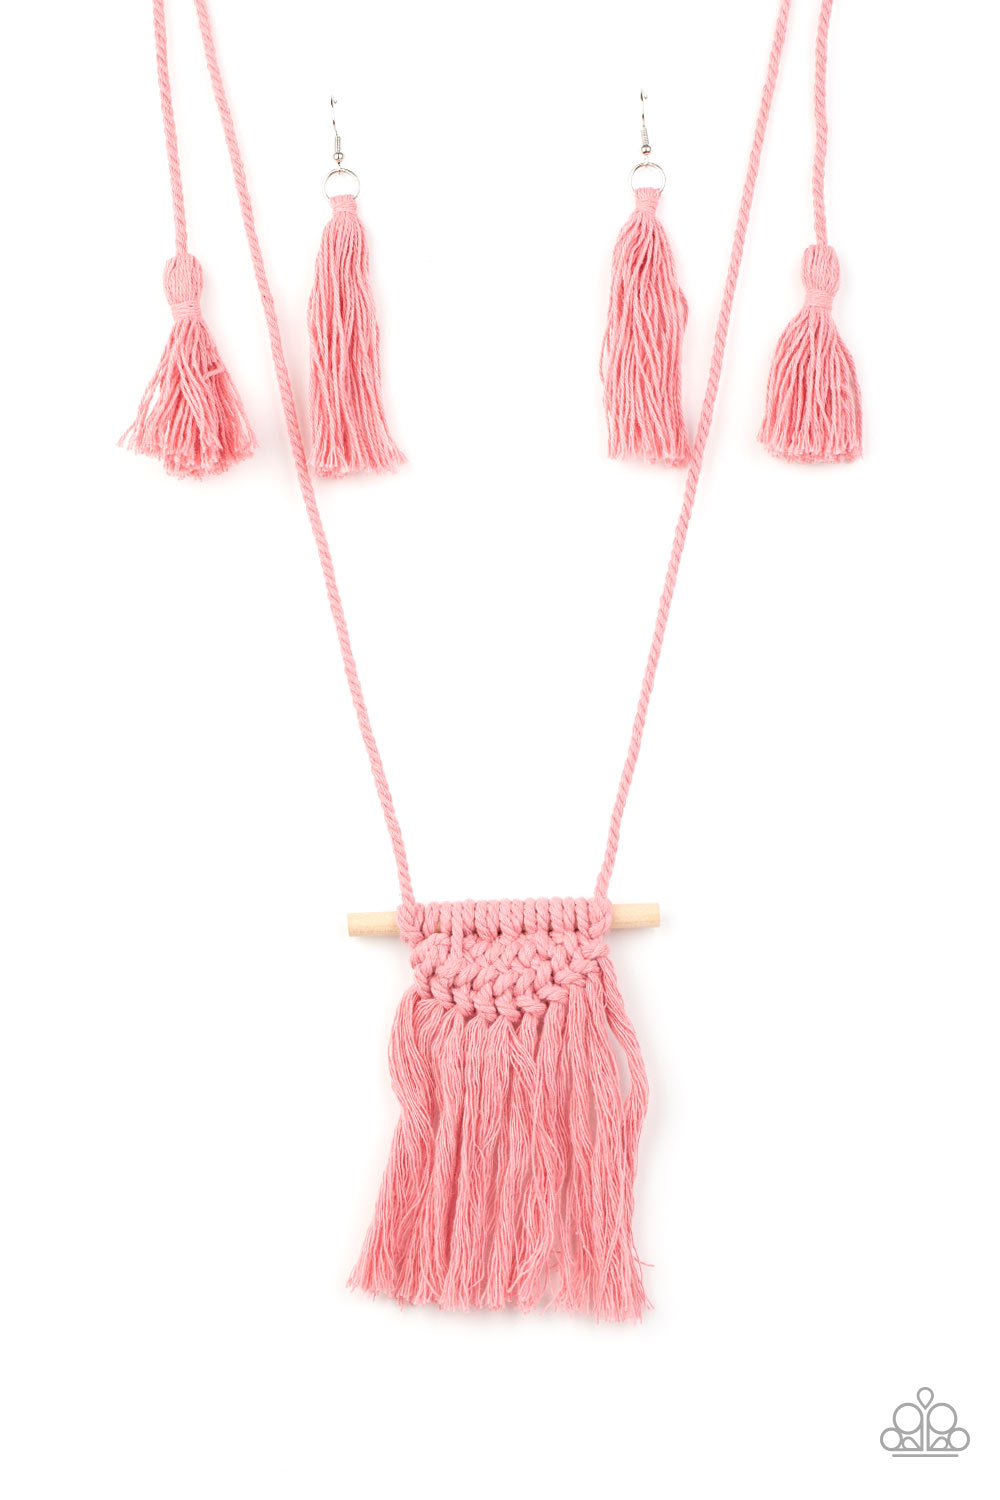 Necklace - Between You and MACRAME - Pink